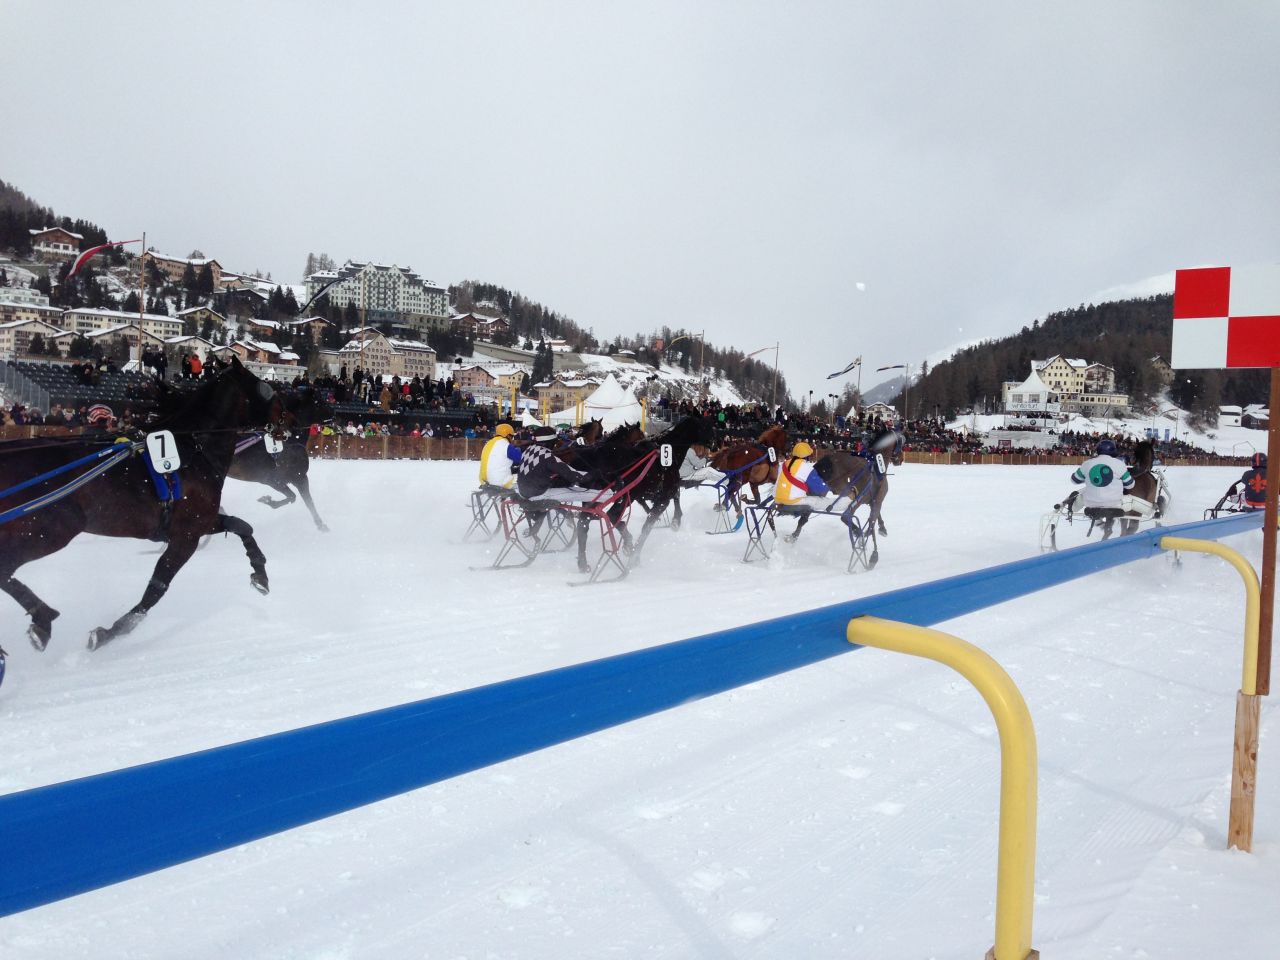 Each meeting features flat racing, skijoring and winter-style trotting (pictured).